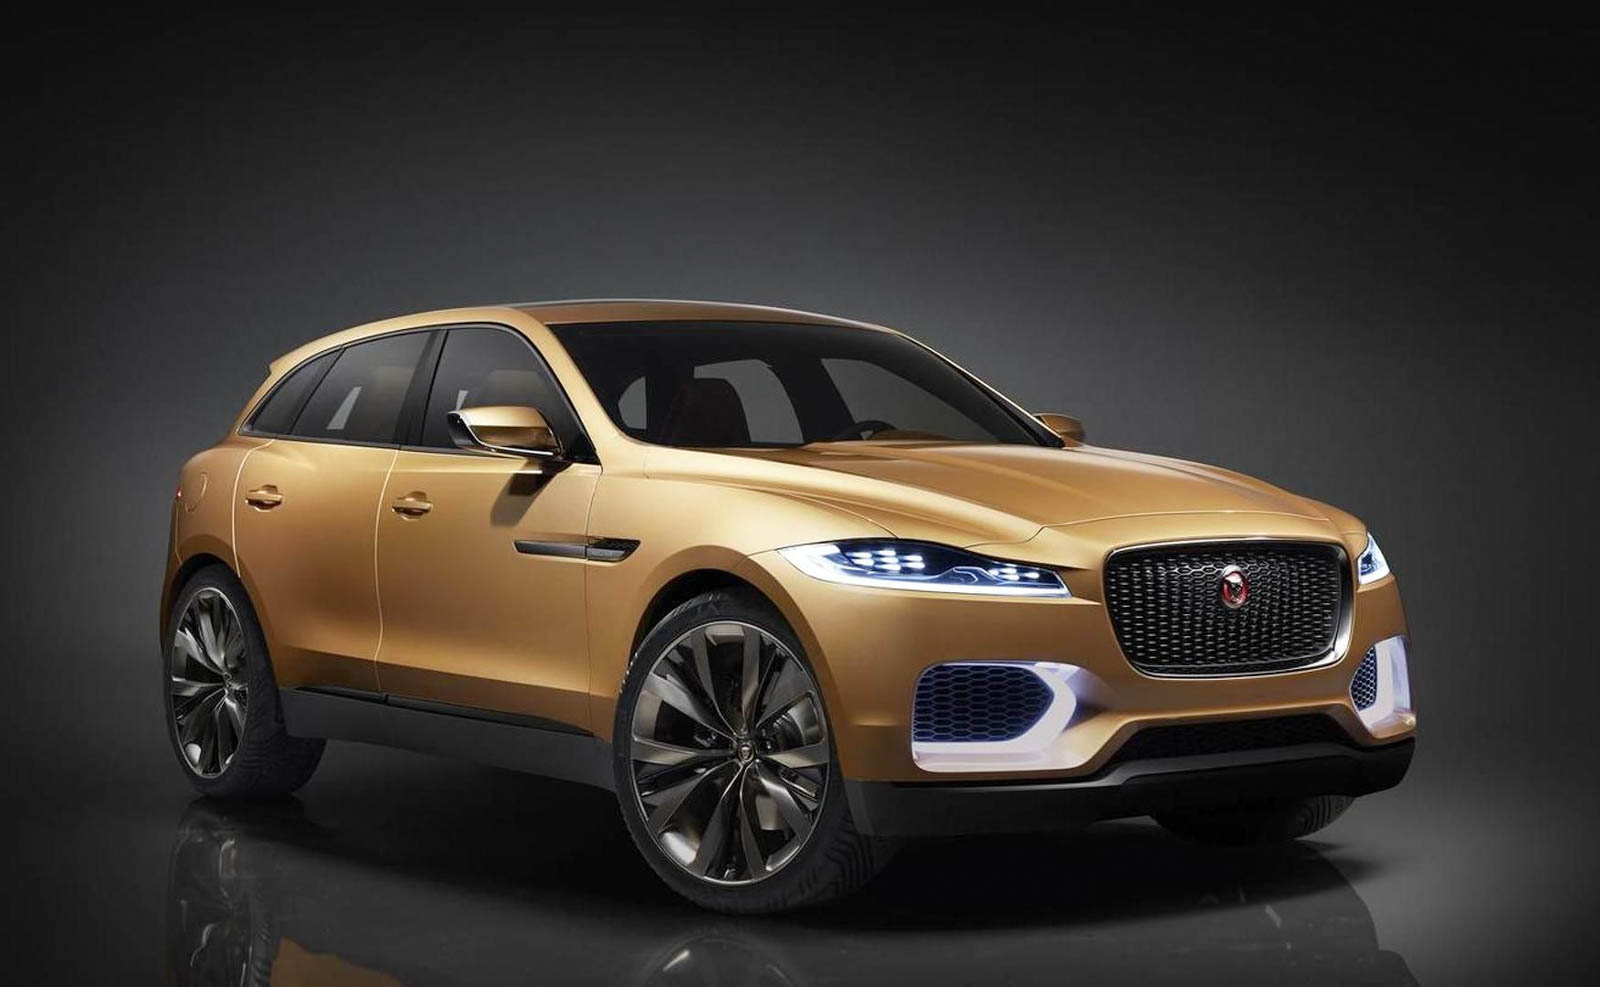 Jaguar Confirms J-Pace Electric SUV (Tesla Model X Rival) In The Works